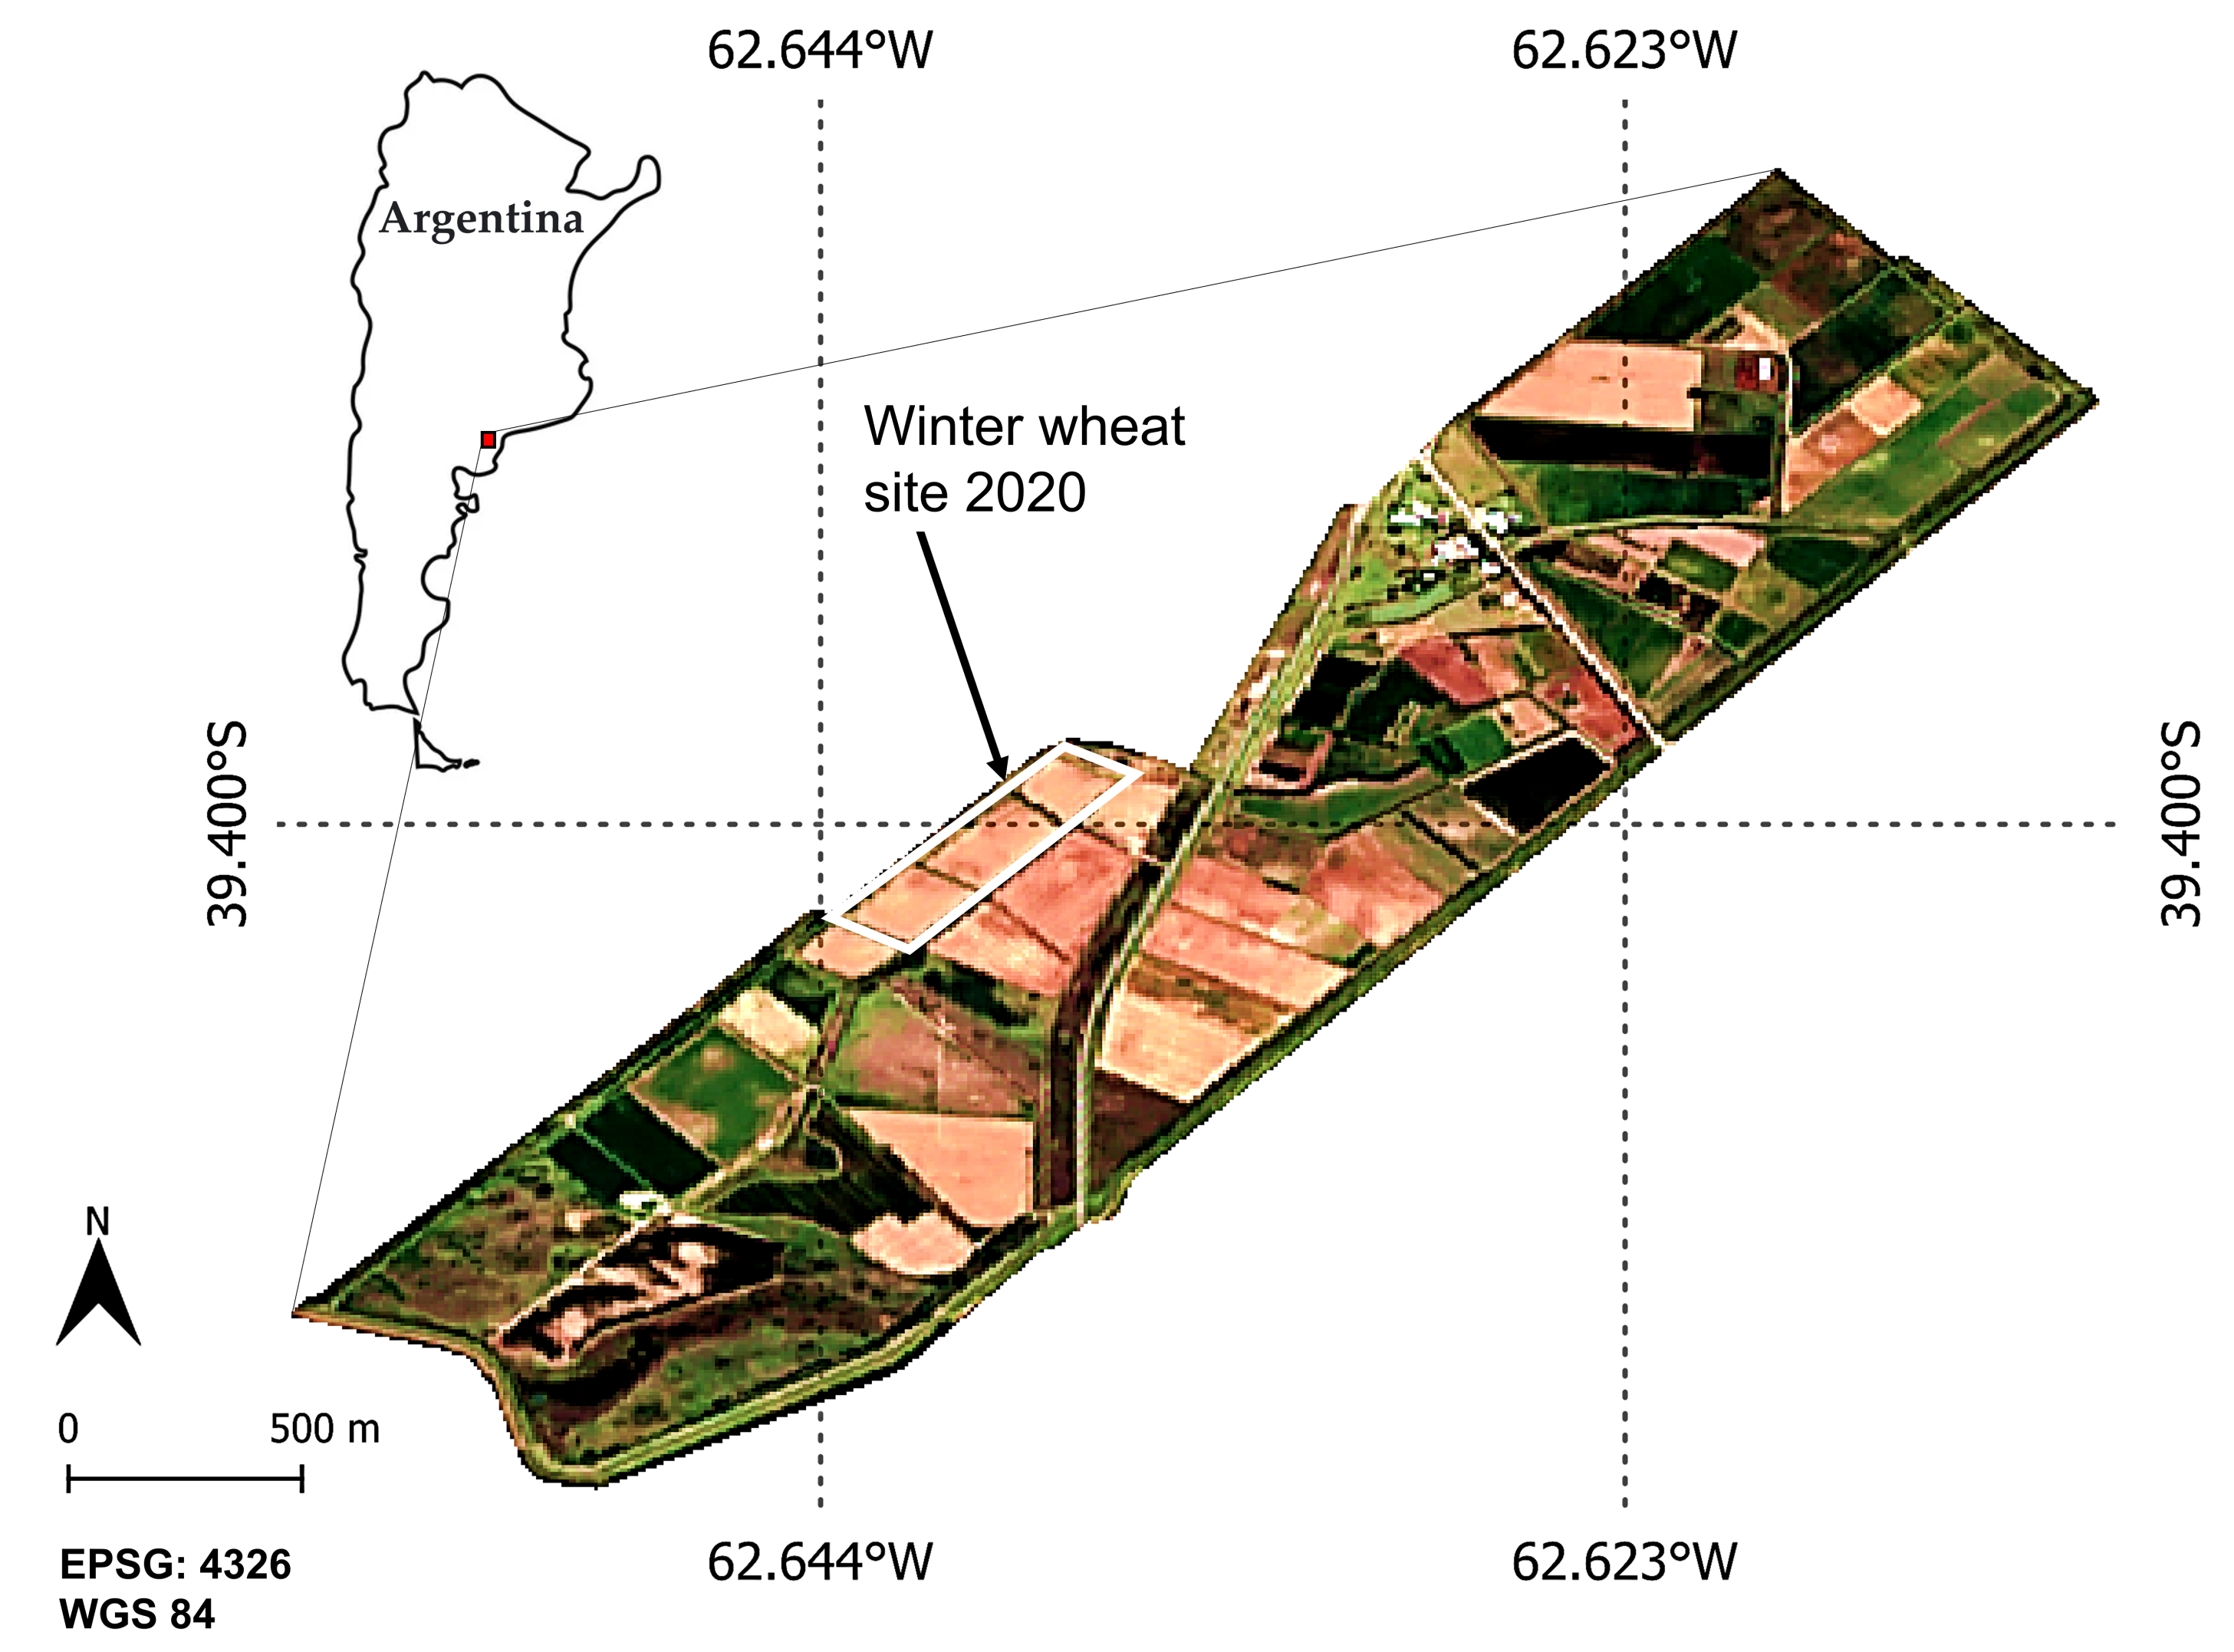 Remote Sensing | Free Full-Text | Seasonal Mapping Irrigated Winter Wheat Traits in Argentina with a Retrieval Workflow Using Sentinel-2 Imagery